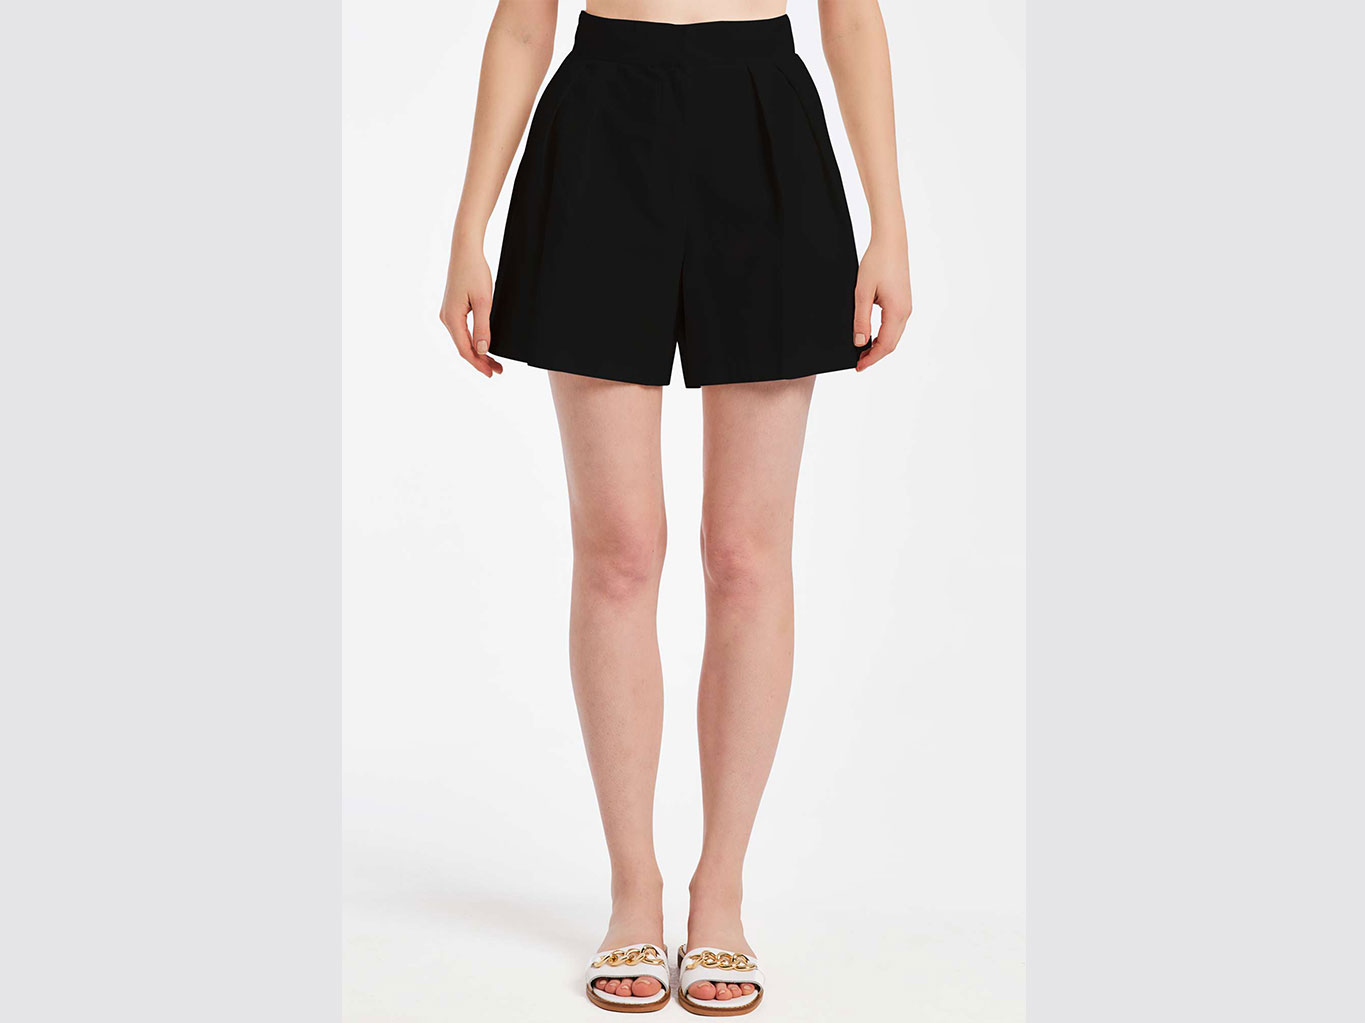 The Sirocco Shorts-Black - 4Tailors